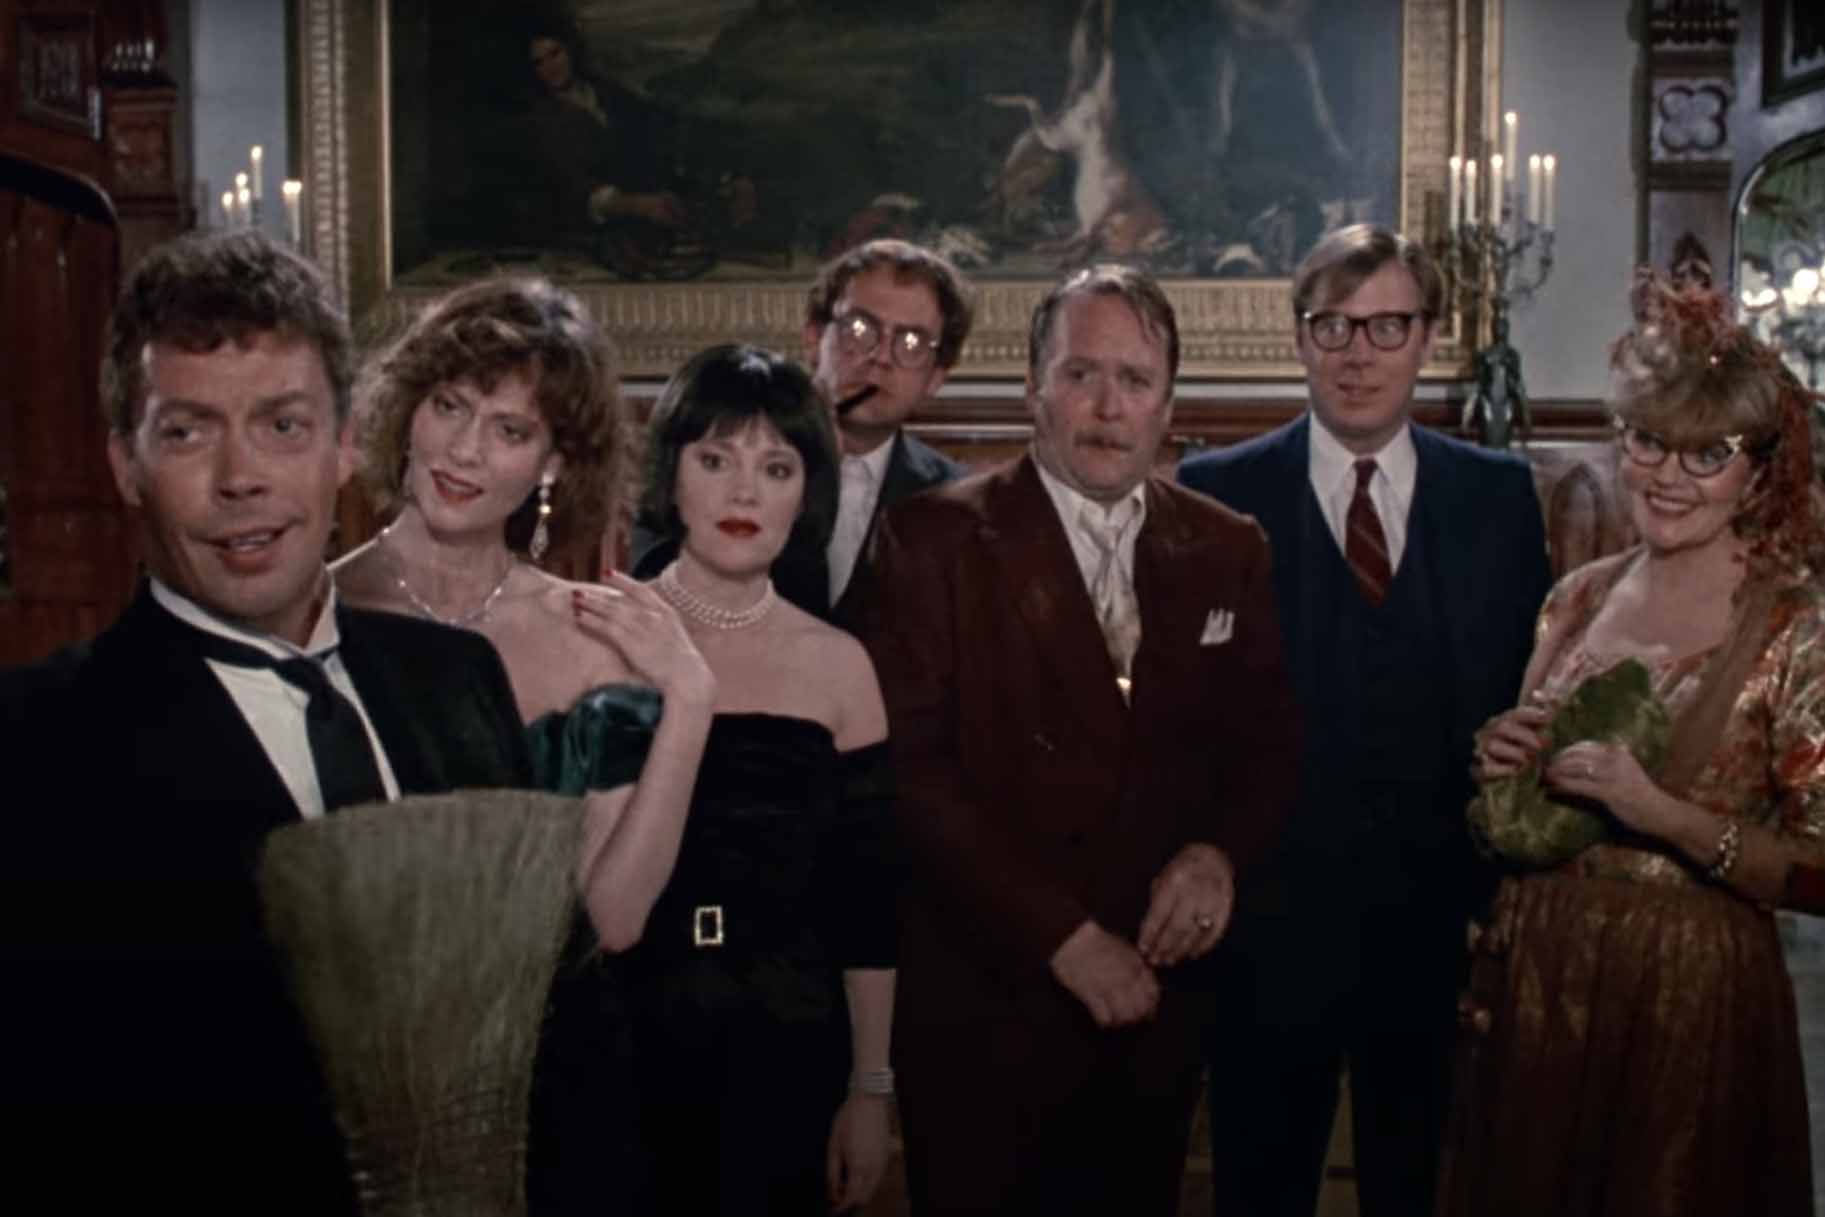 The cast wears formalwear and stares in Clue (1985).